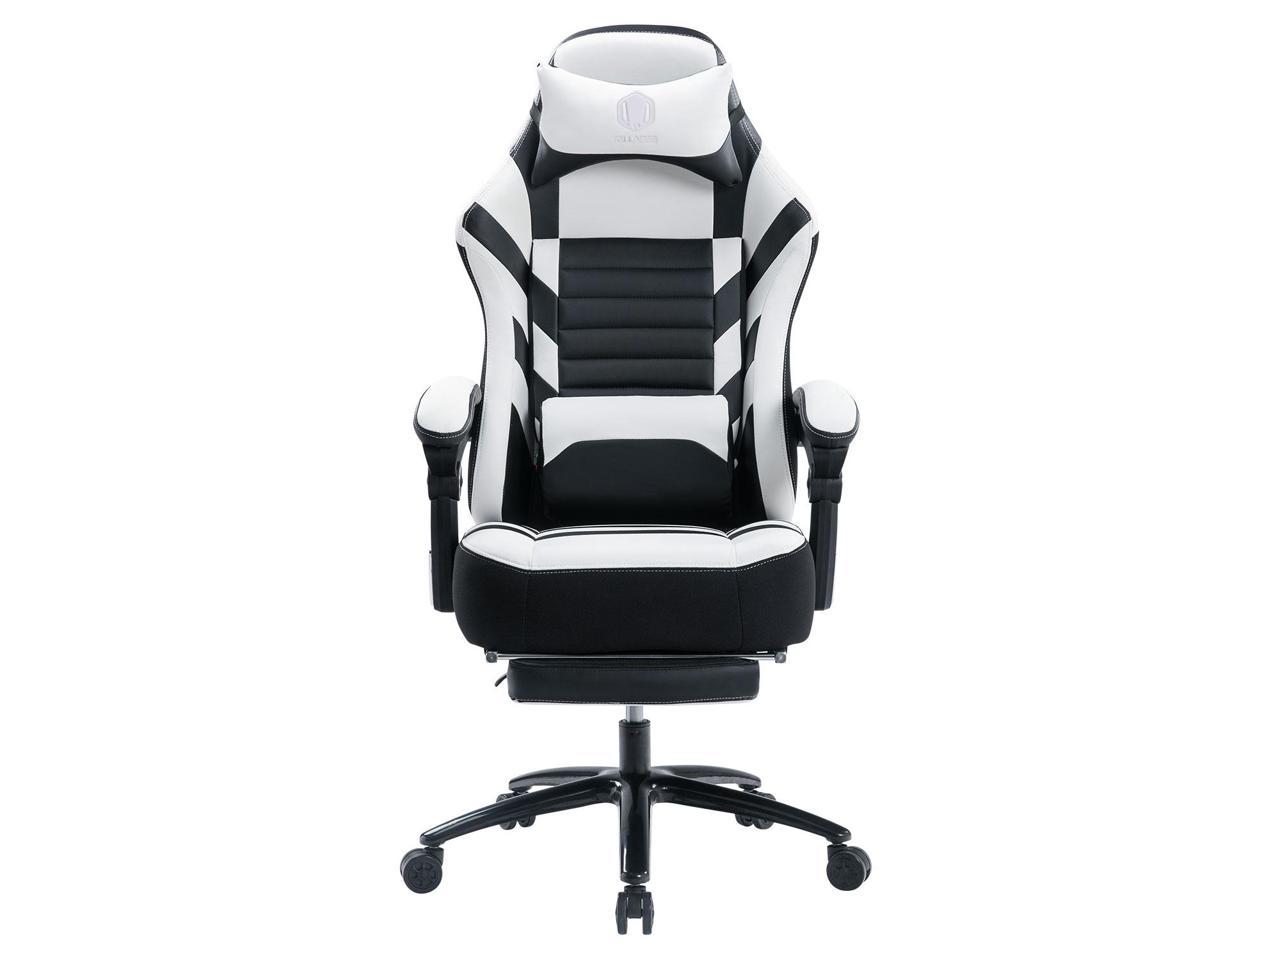 Adjustable Massage Lumbar Cushion KILLABEE Big and Tall 350lb Massage Gaming Chair Metal Base Retractable Footrest High Back Ergonomic Leather Racing Computer Desk Executive Office Chair 